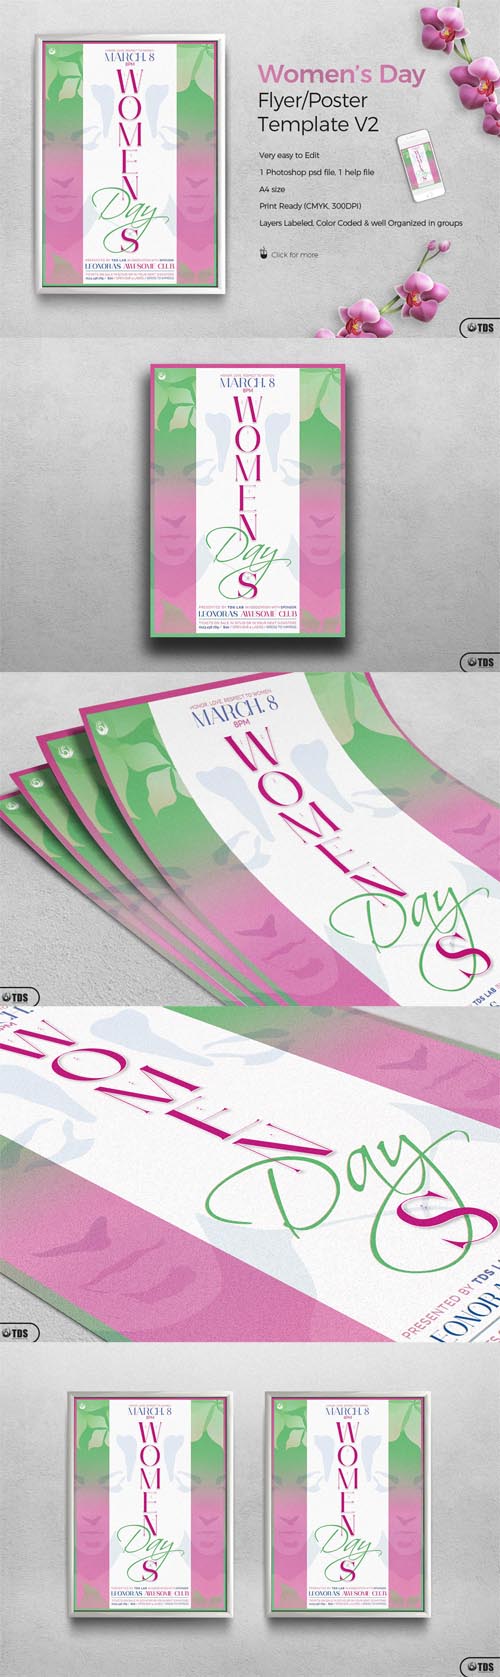 Womens Day Flyer Template V2